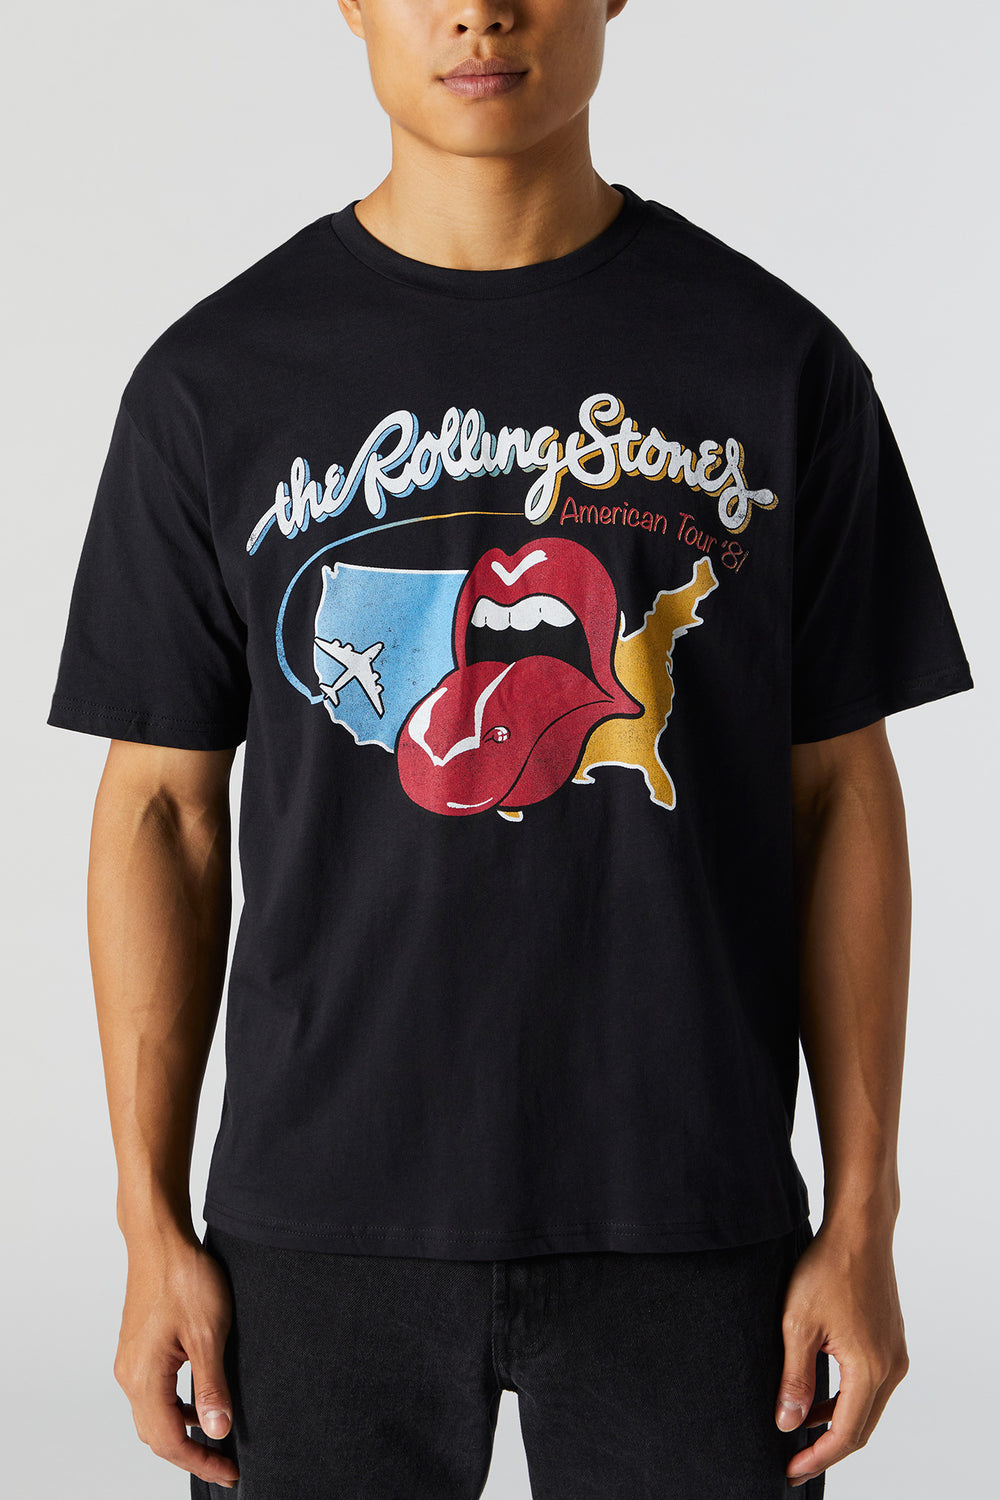 Rolling Stones Graphic T-Shirt Rolling Stones Graphic T-Shirt 4